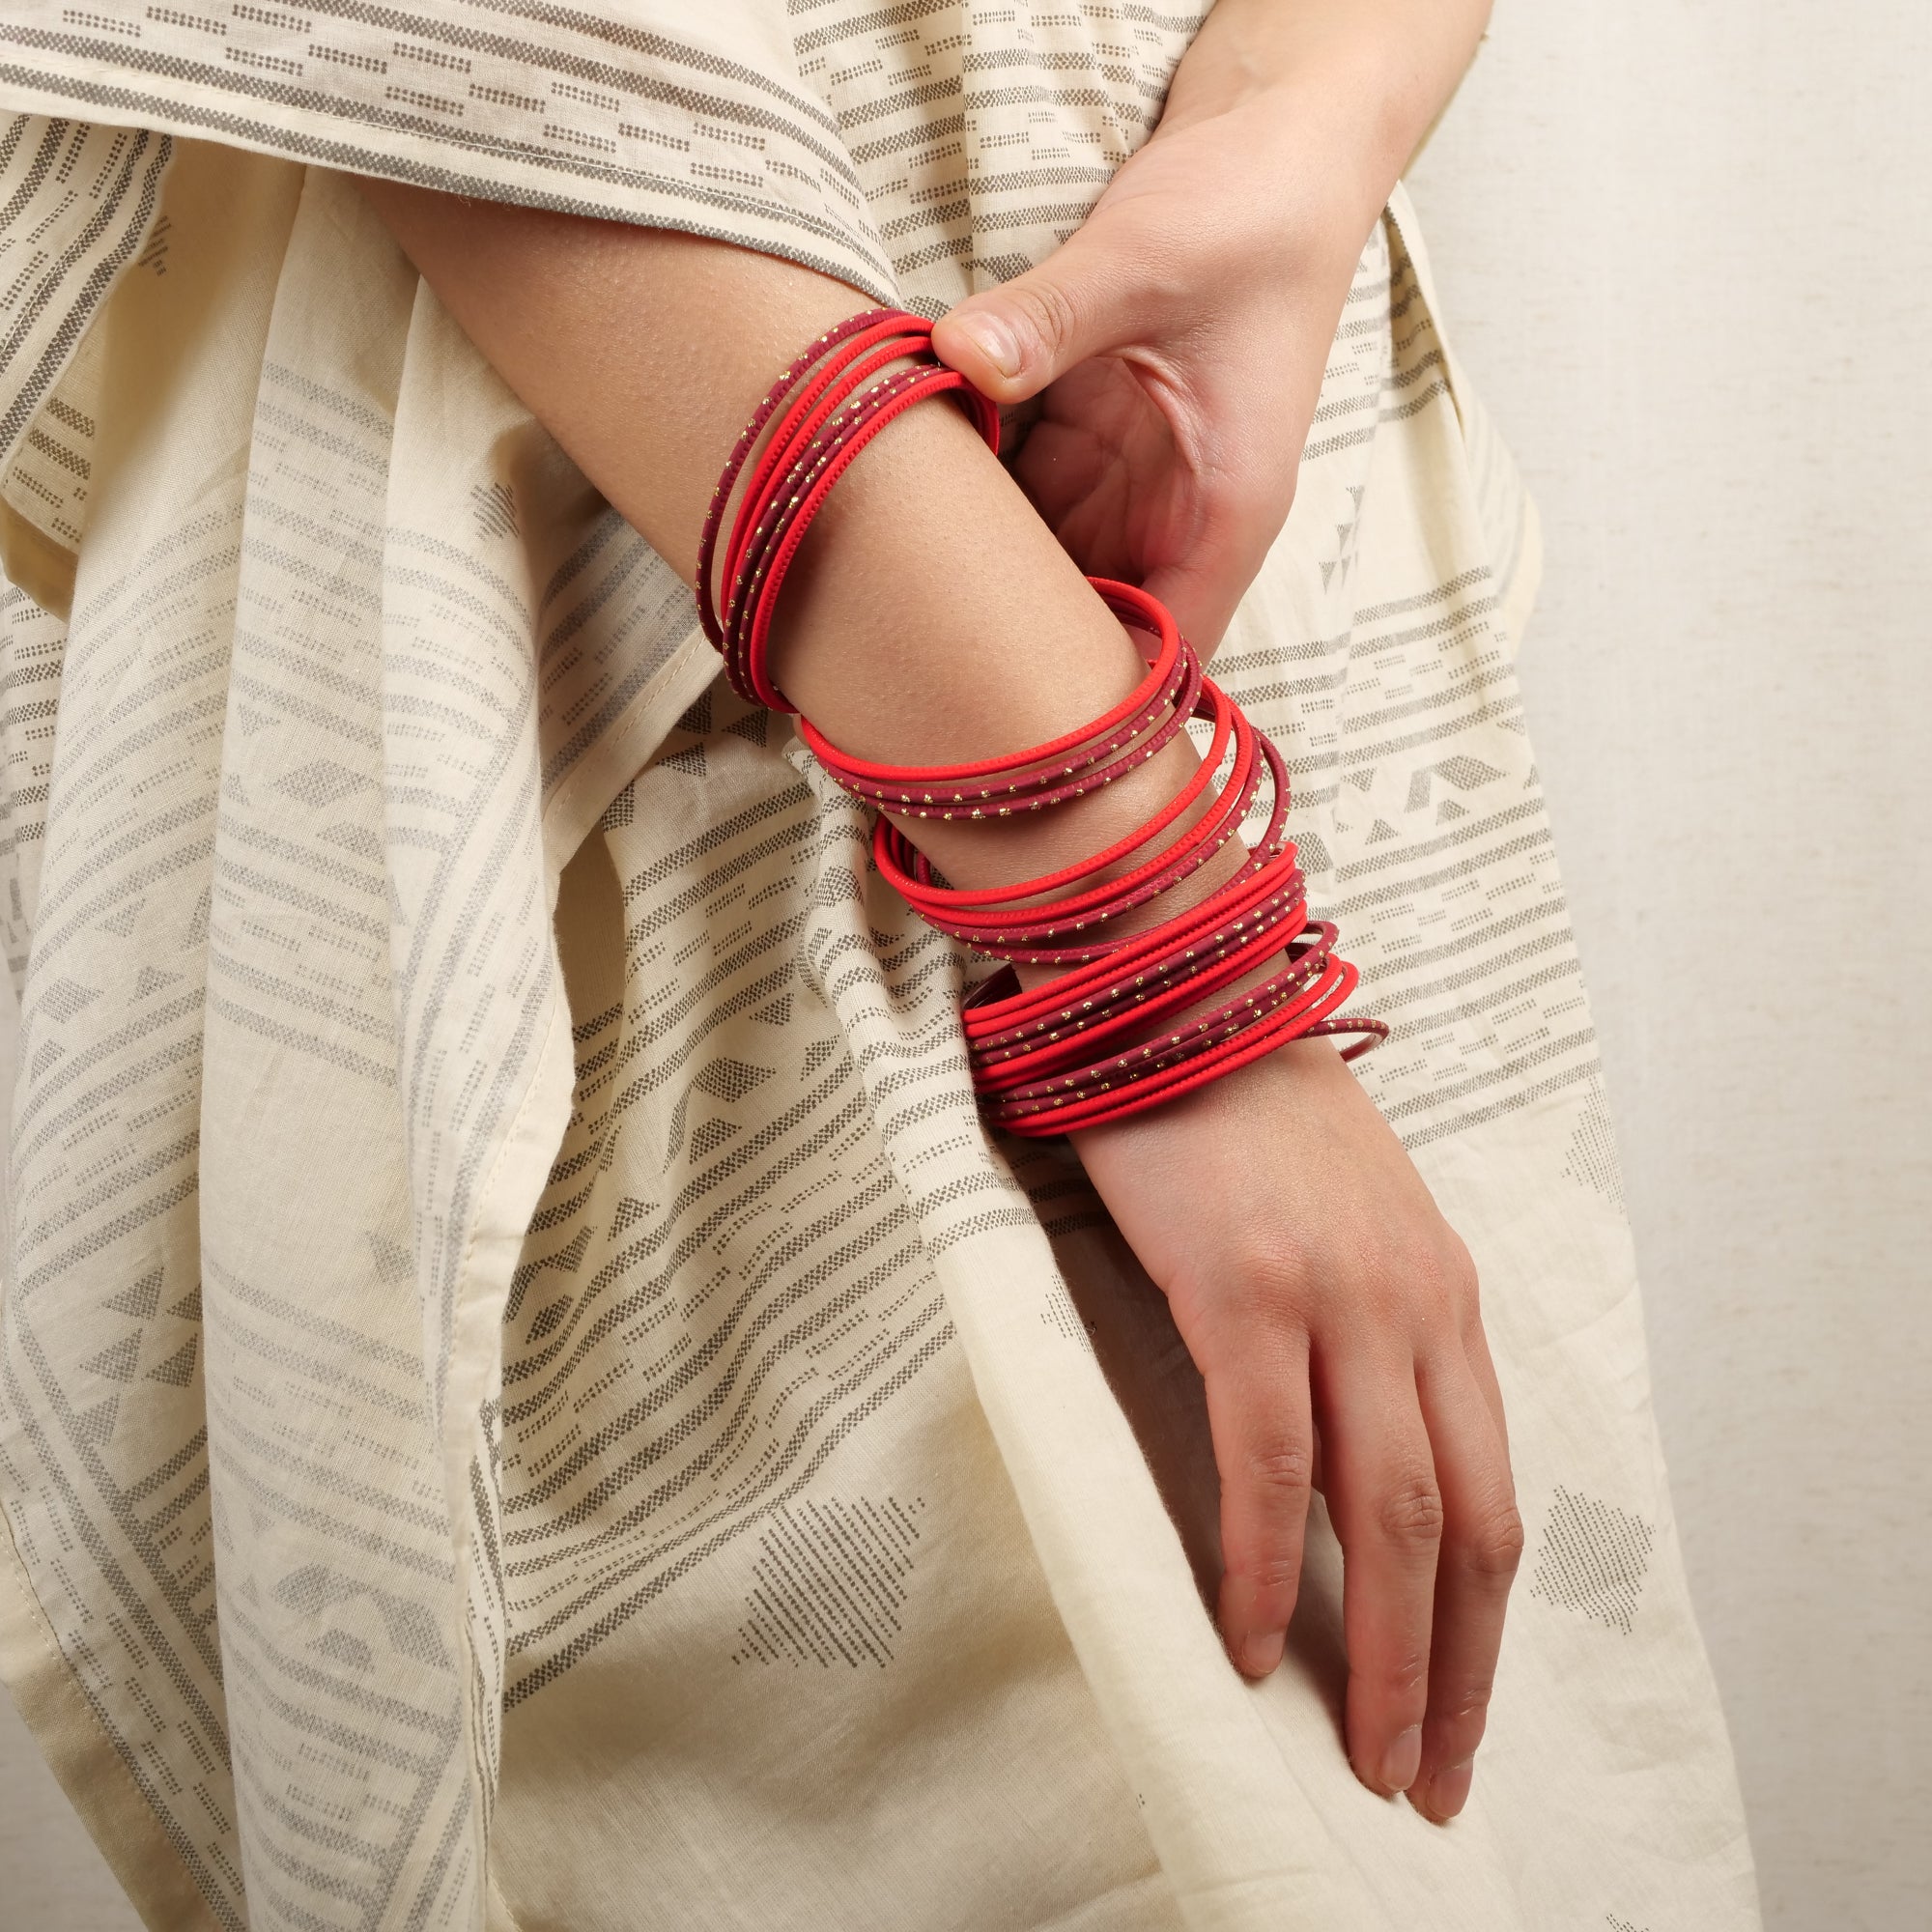 Crimson Red and Maroon Bangle Stack